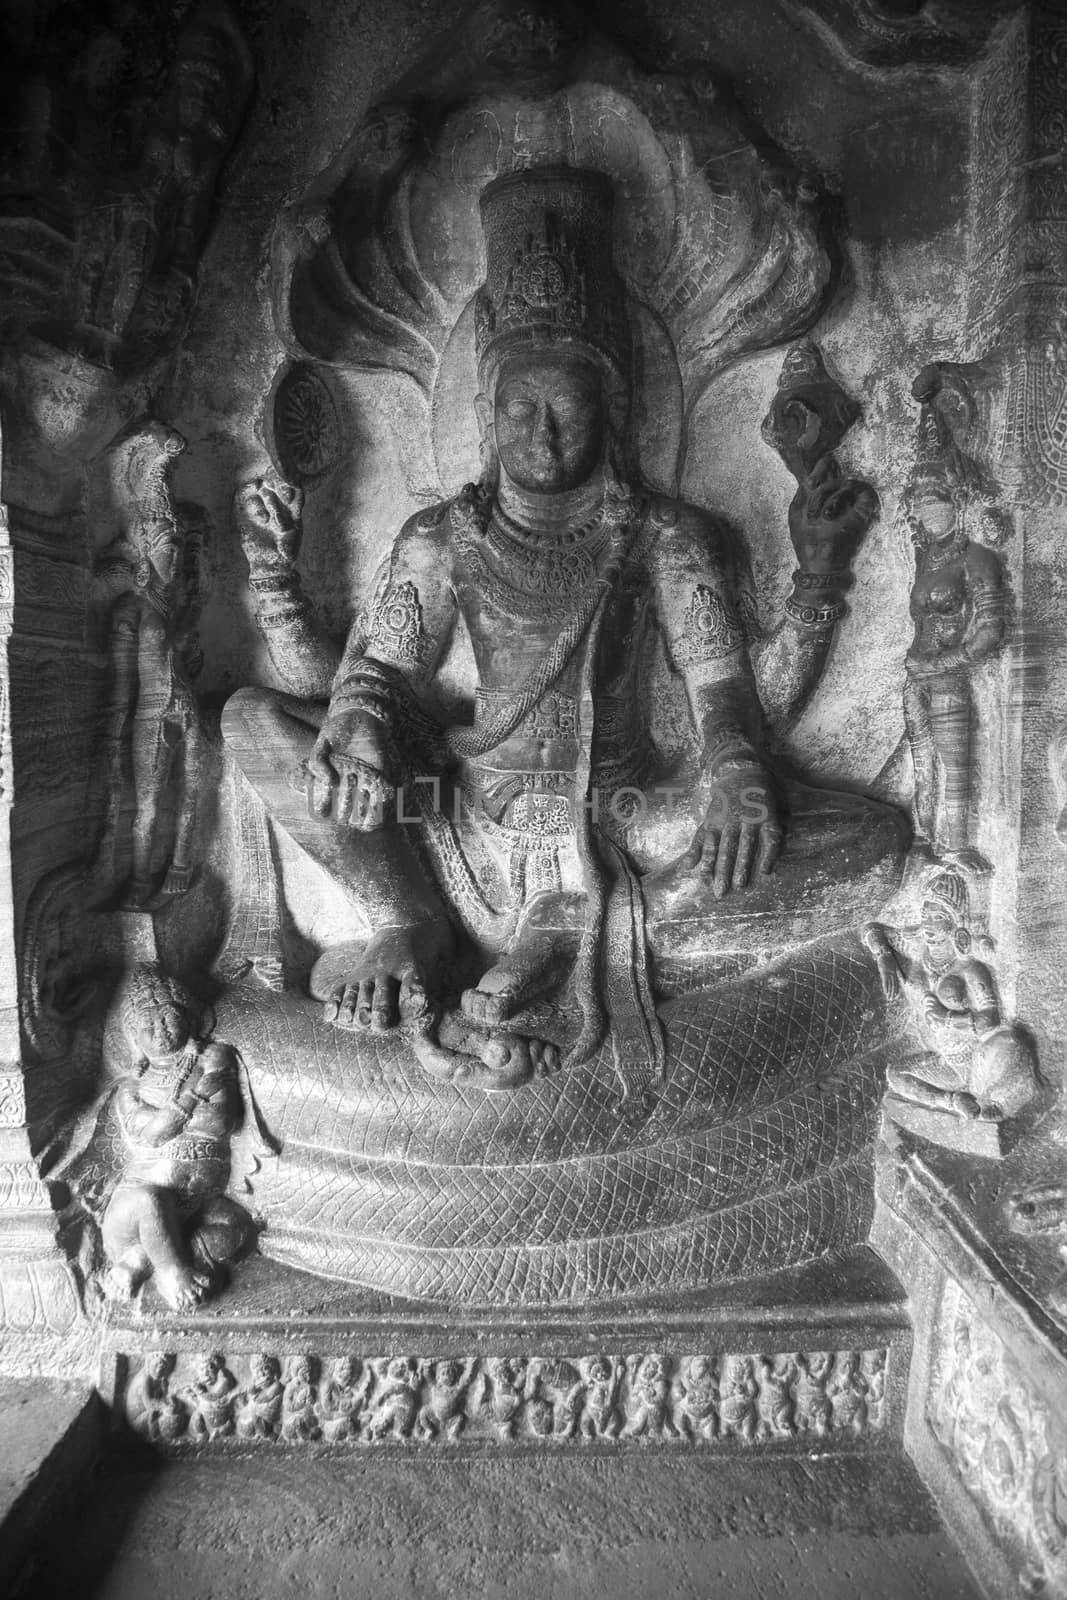 Cave temple cut out from the rock at Badami, India - relief cave entrance in black and white